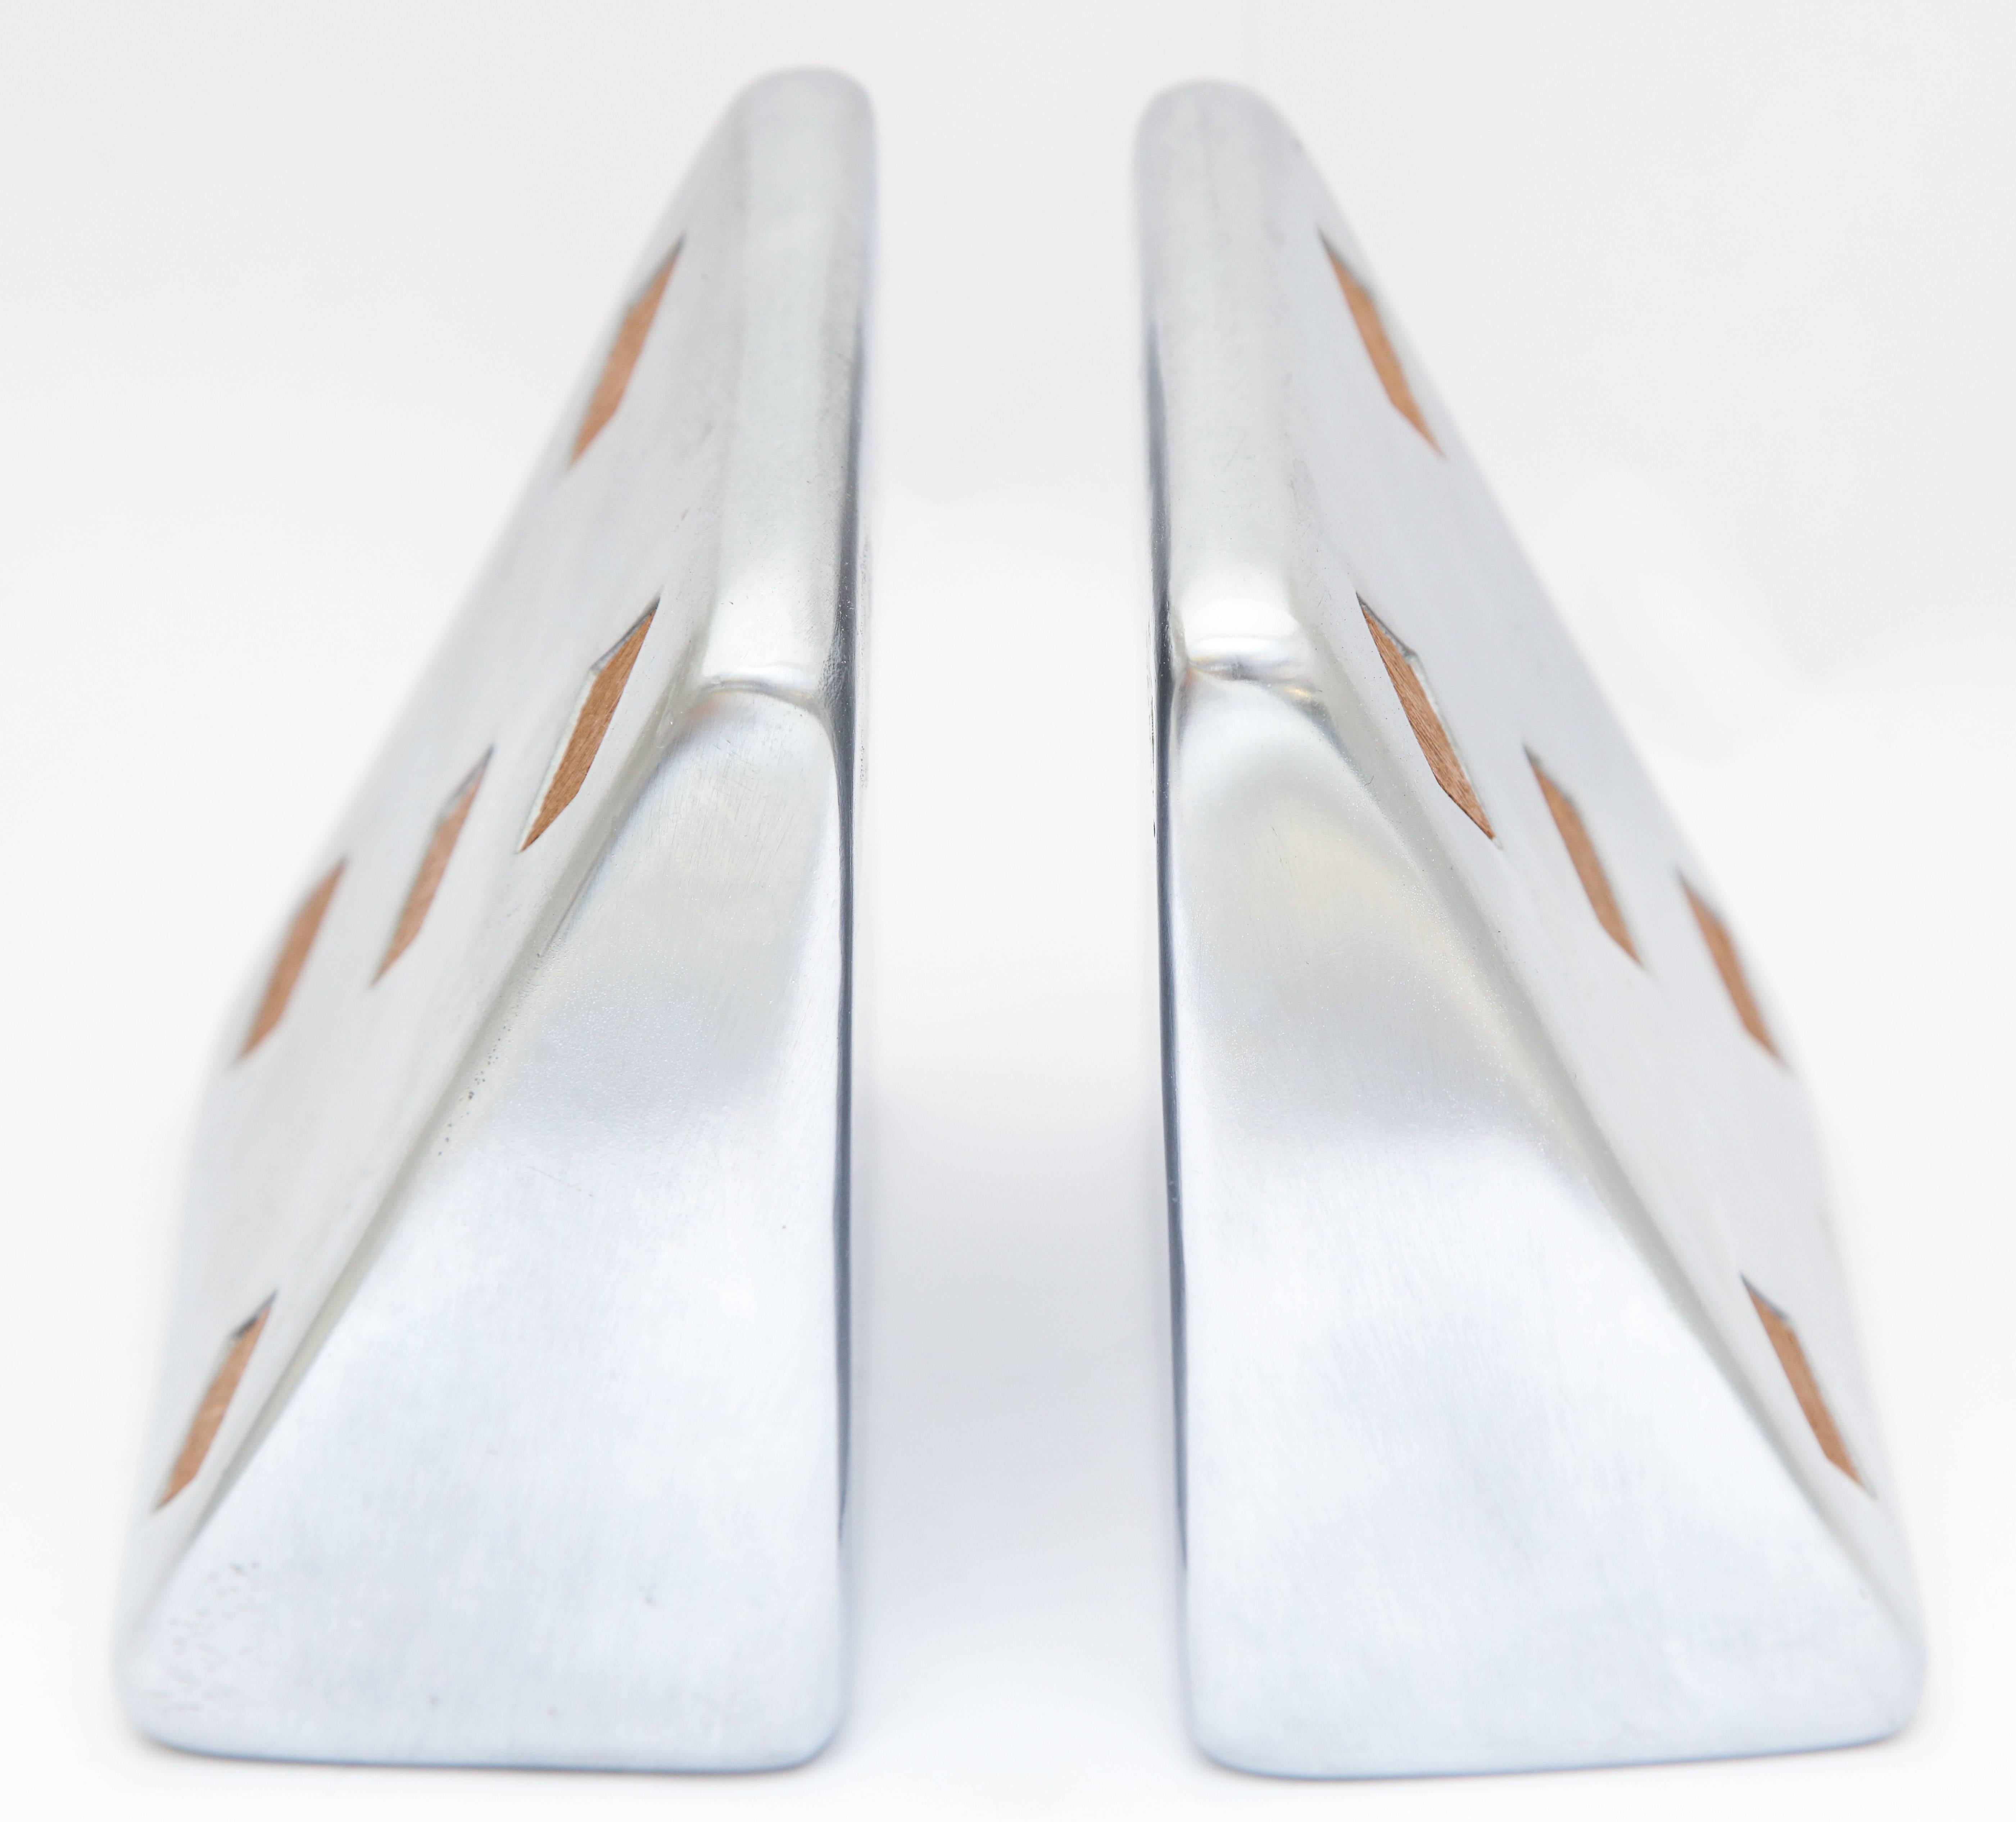 These silver plated metal bookends are a great design
from the 1950s. These have their original paper label which makes
them interesting. Designed by Ben Seibel.